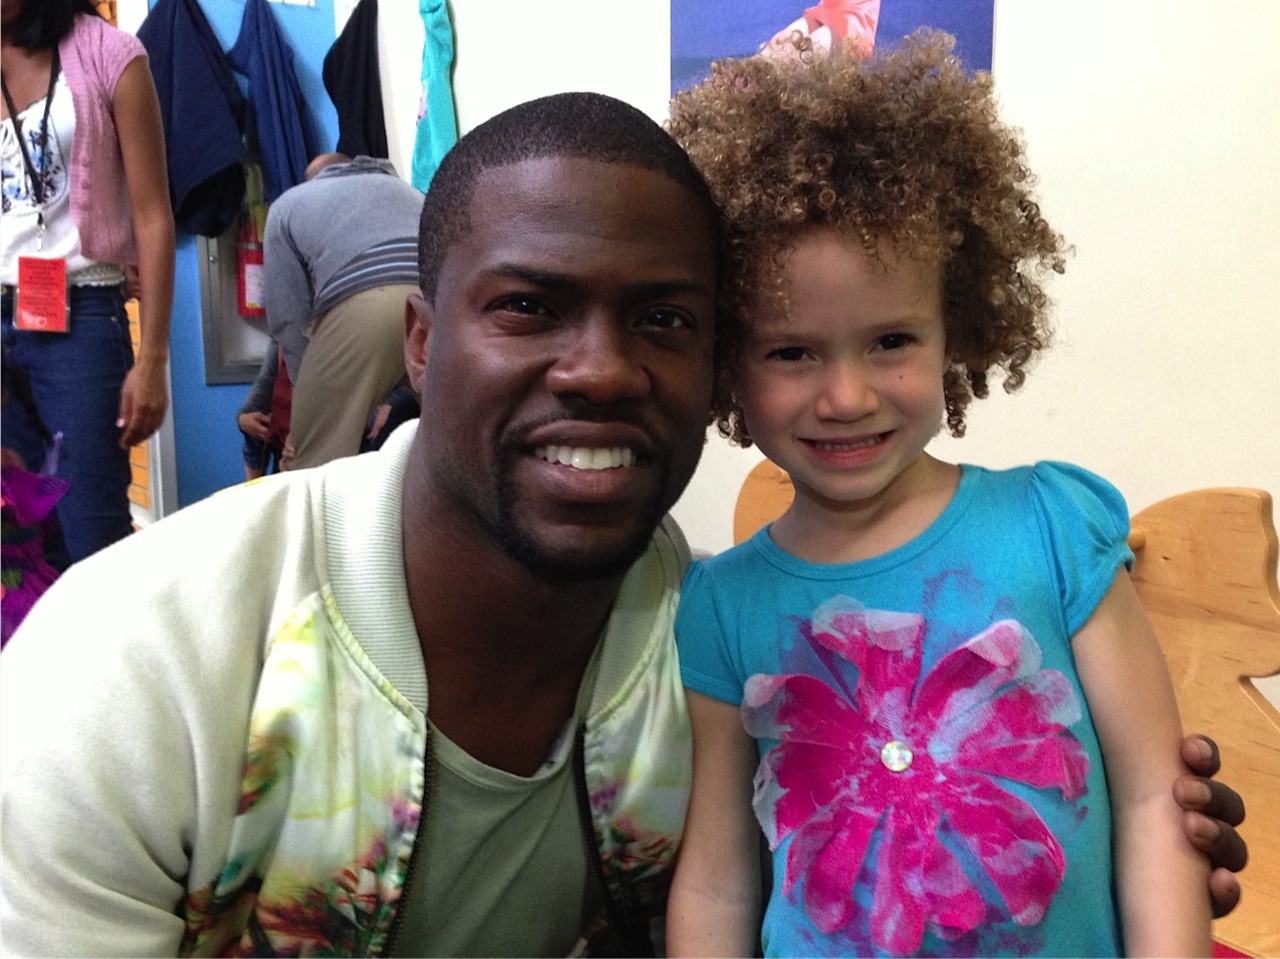 On set of Real Husbands of Hollywood with Kevin Hart! 2013